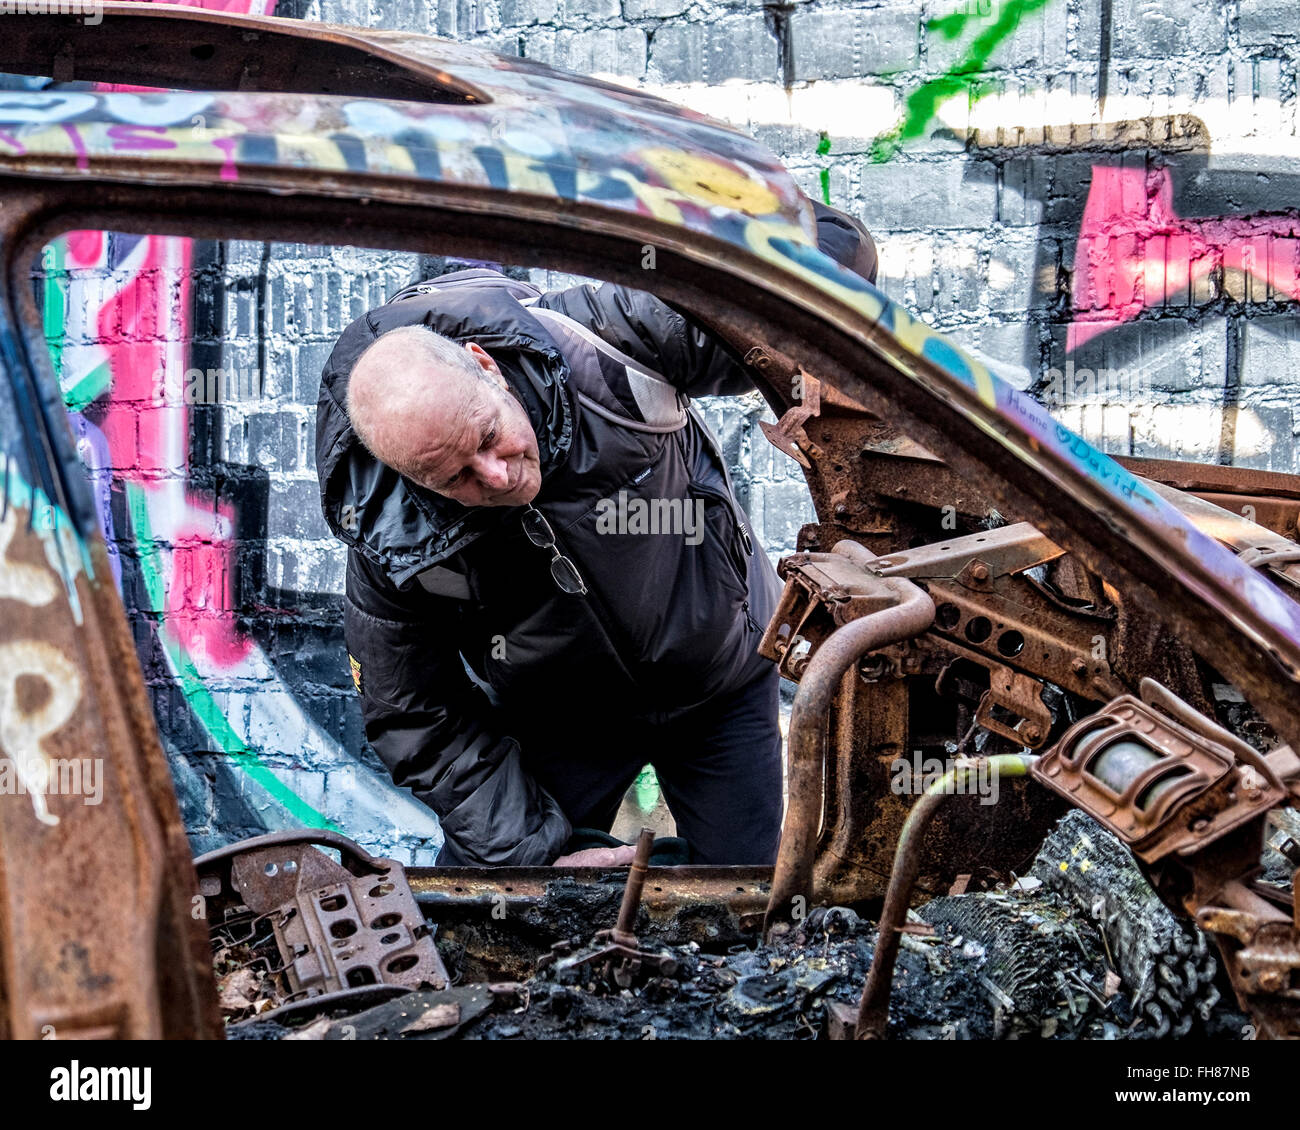 Güterbahnhof train station, Pankow, Berlin. Old man looks at burnt out car in fire damaged garage at disused freight rail yard Stock Photo